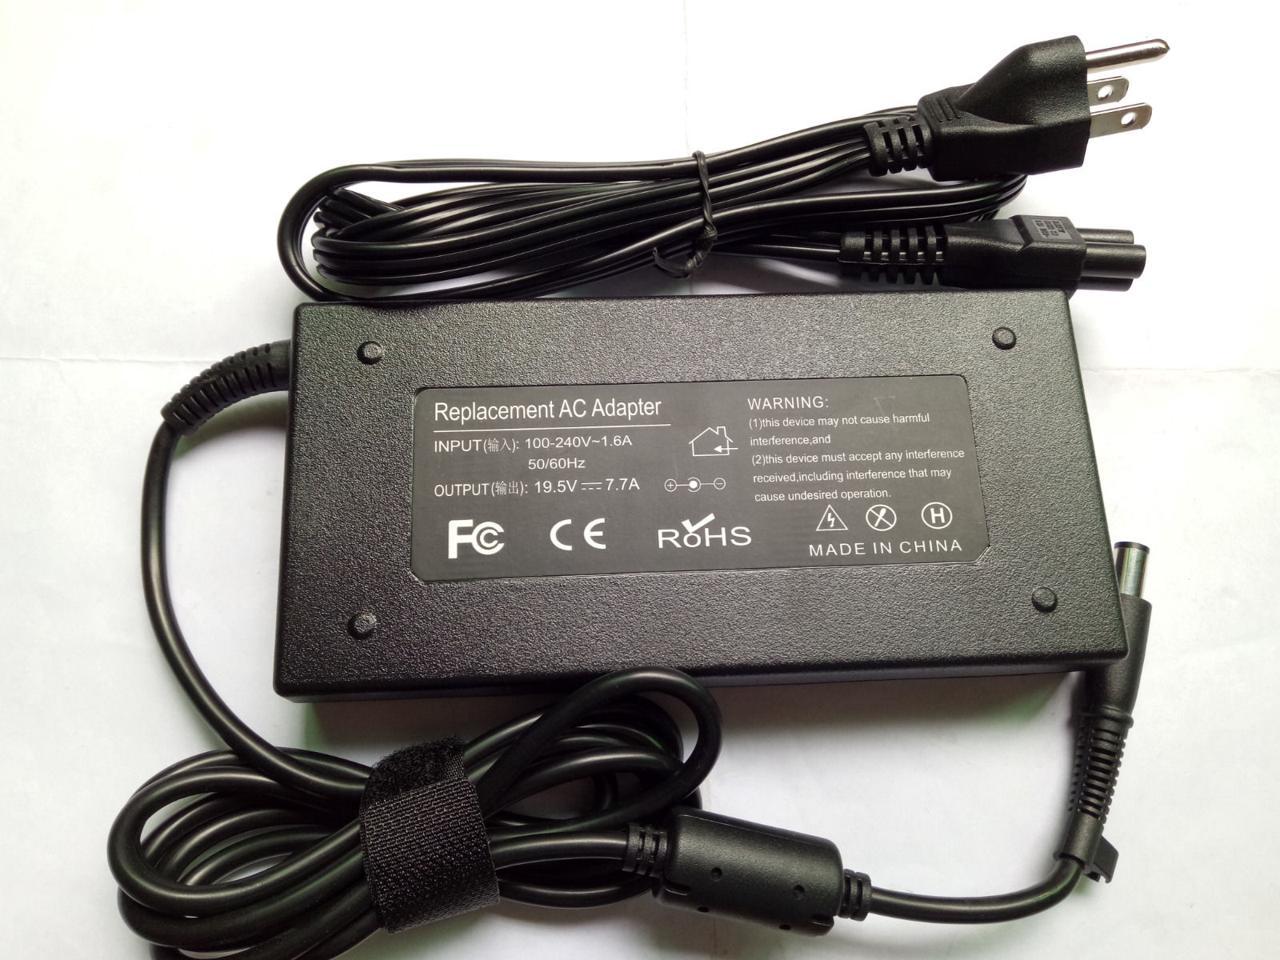 HP TouchSmart 9100 dx9000 520-1105er power supply ac adapter cord cable charger 